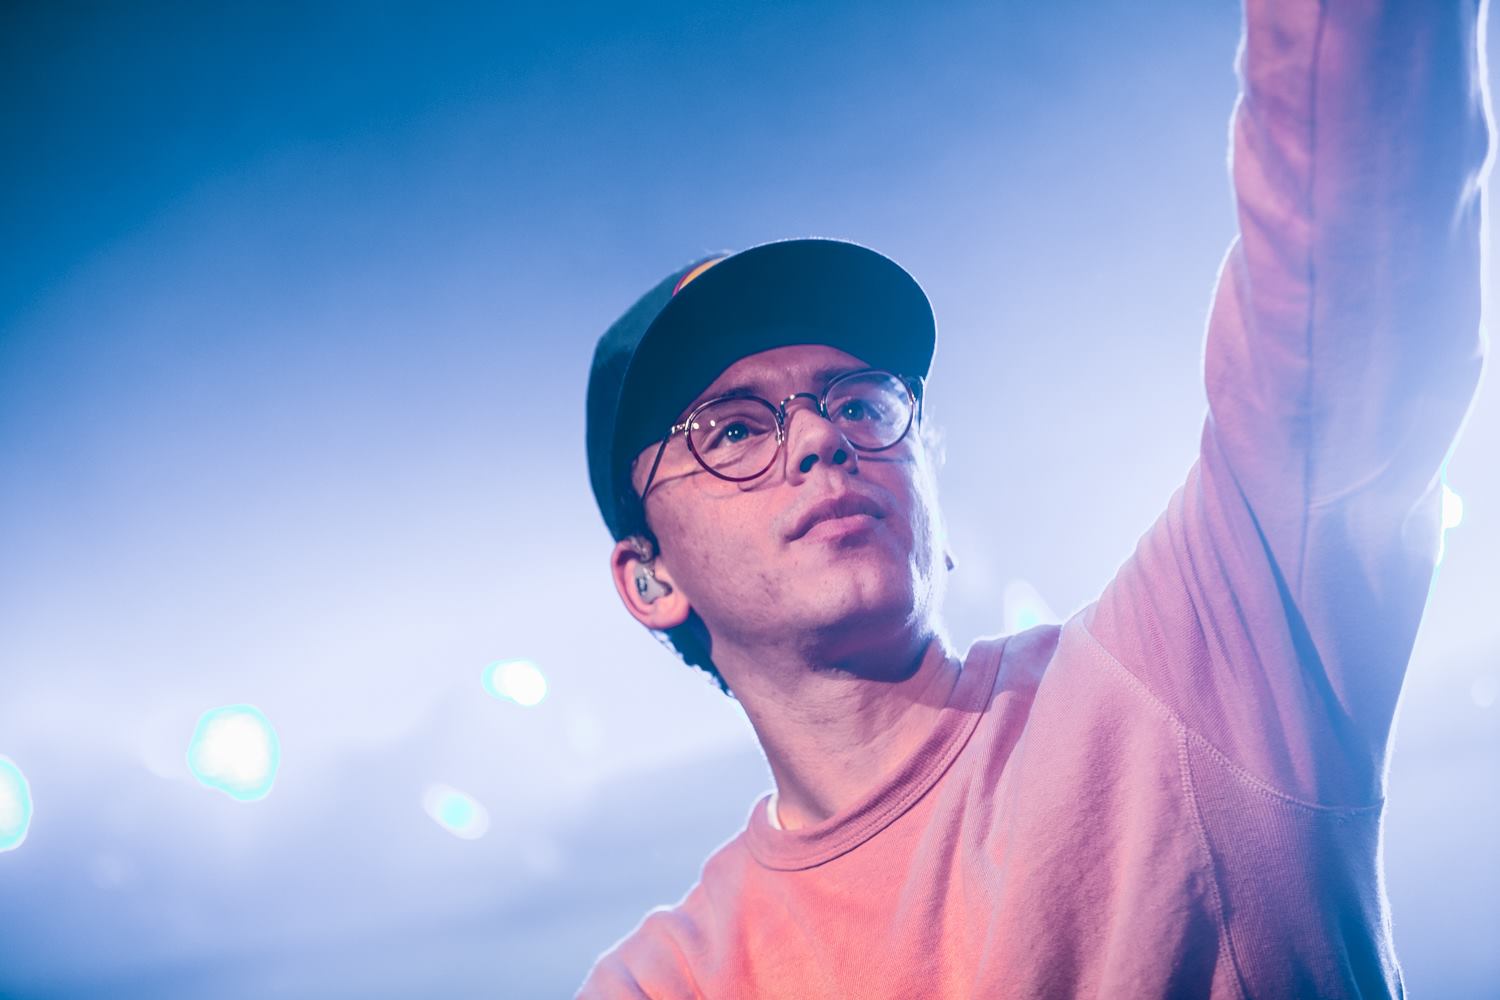 logic, logic suicide, logic suicide song, logic 18002738255, 18002738255 song, suicide song, 18002738255 song